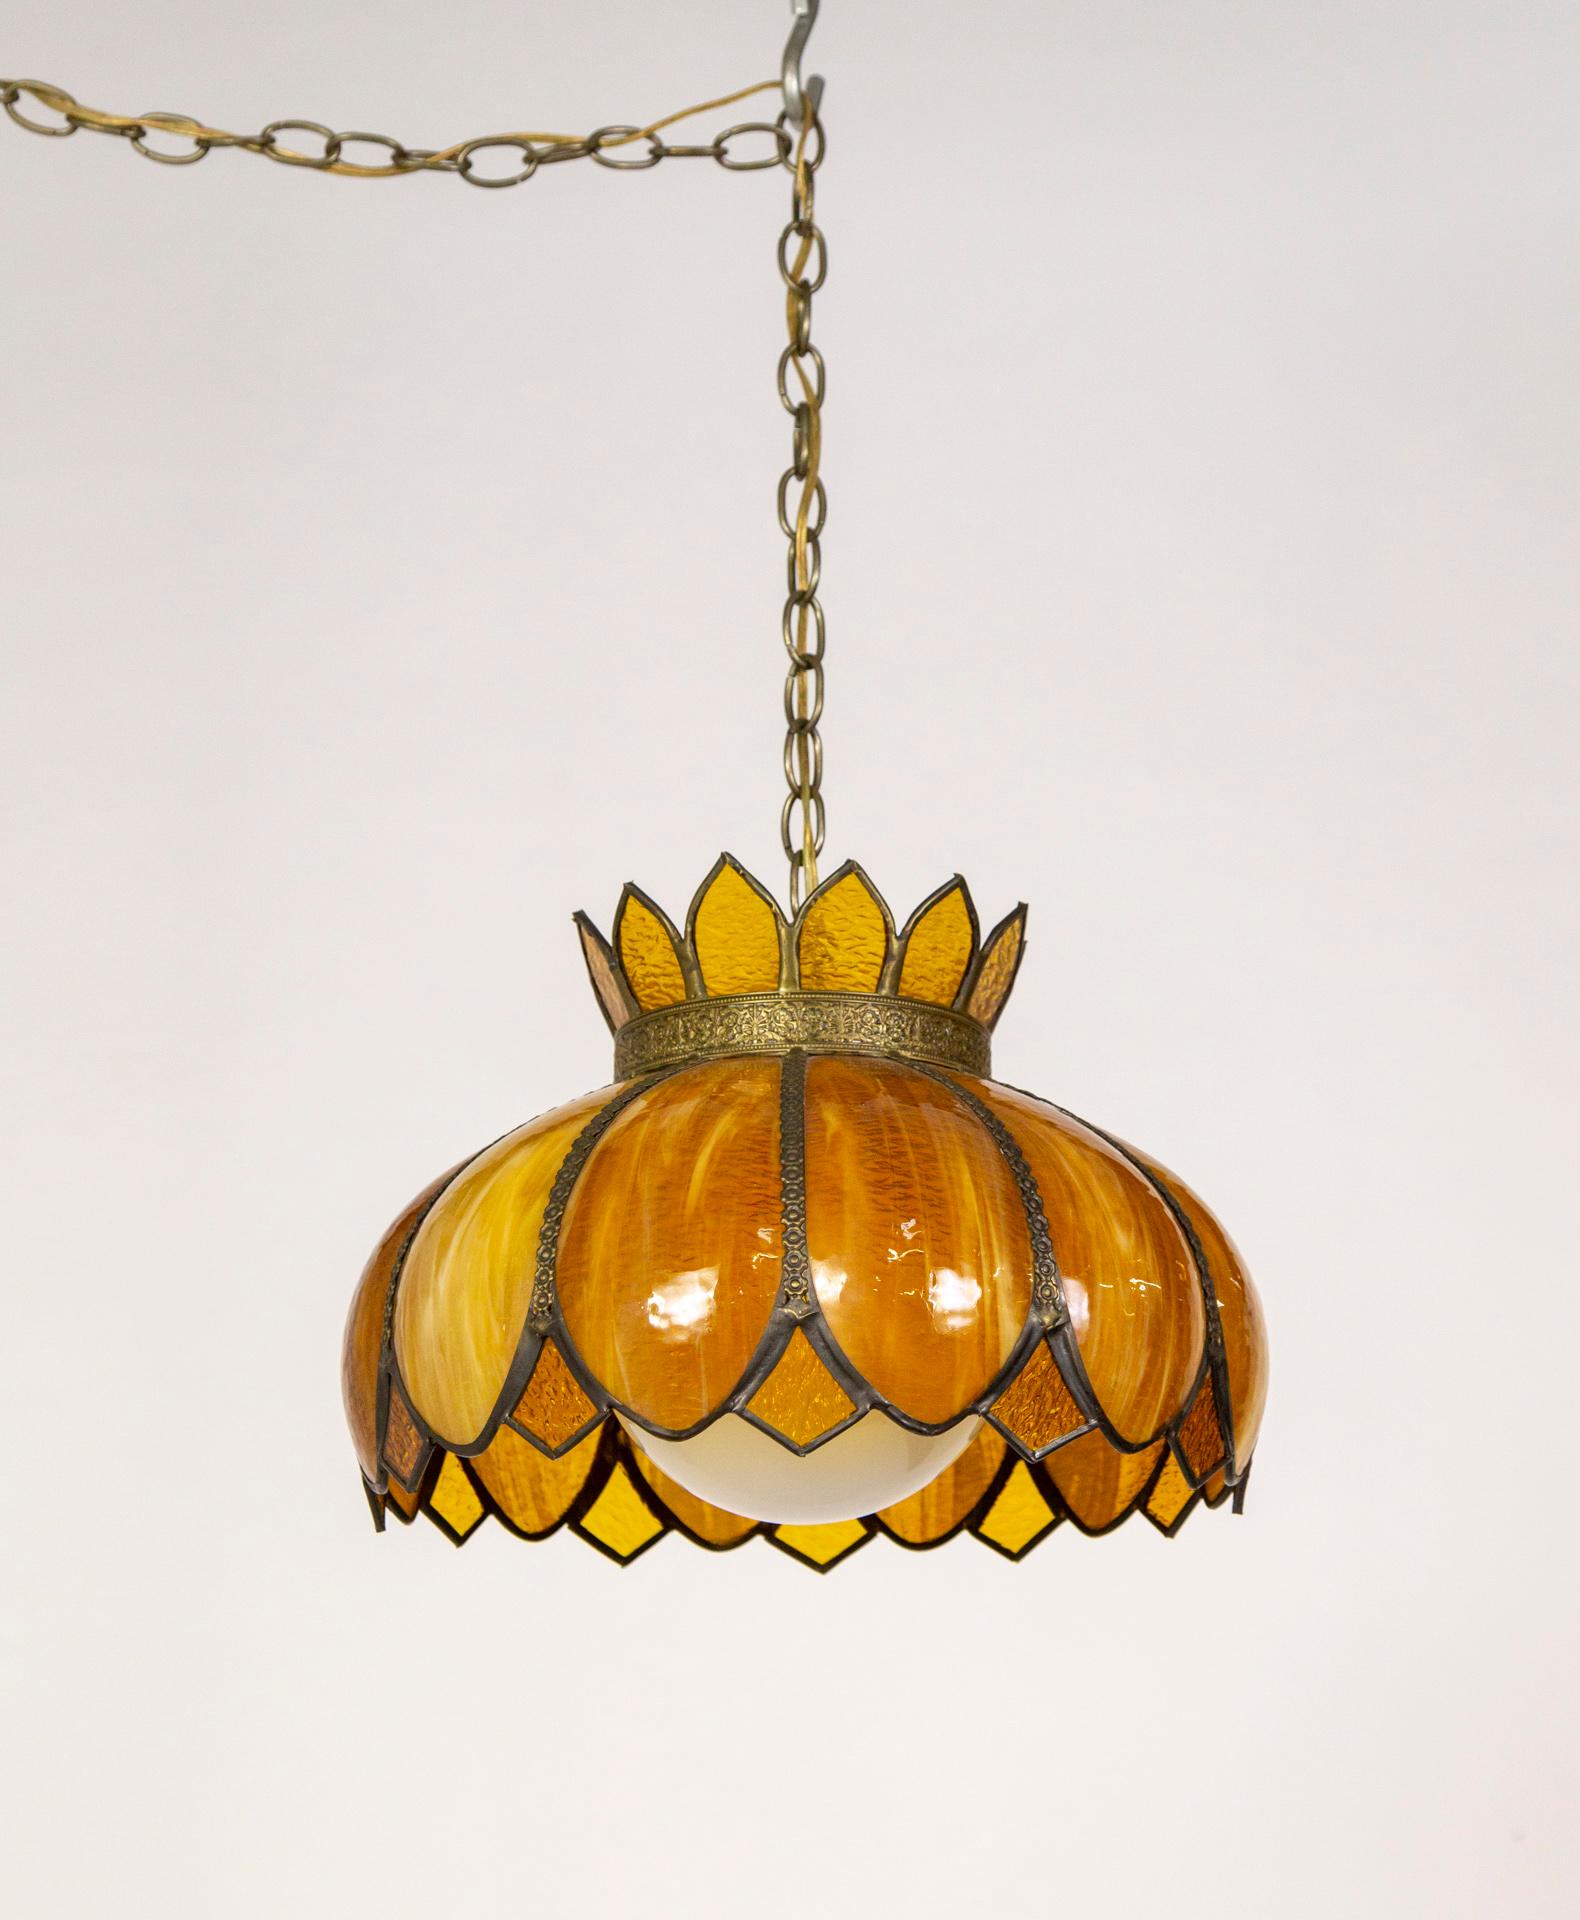 A mid-20th century, hanging light fixture in rich amber, gold, caramel, and yellow streaked slag and stained glass.  It is a lotus shape with scalloped and diamond petals and an ornately pressed brass band at the top and trimming the petals. A milk